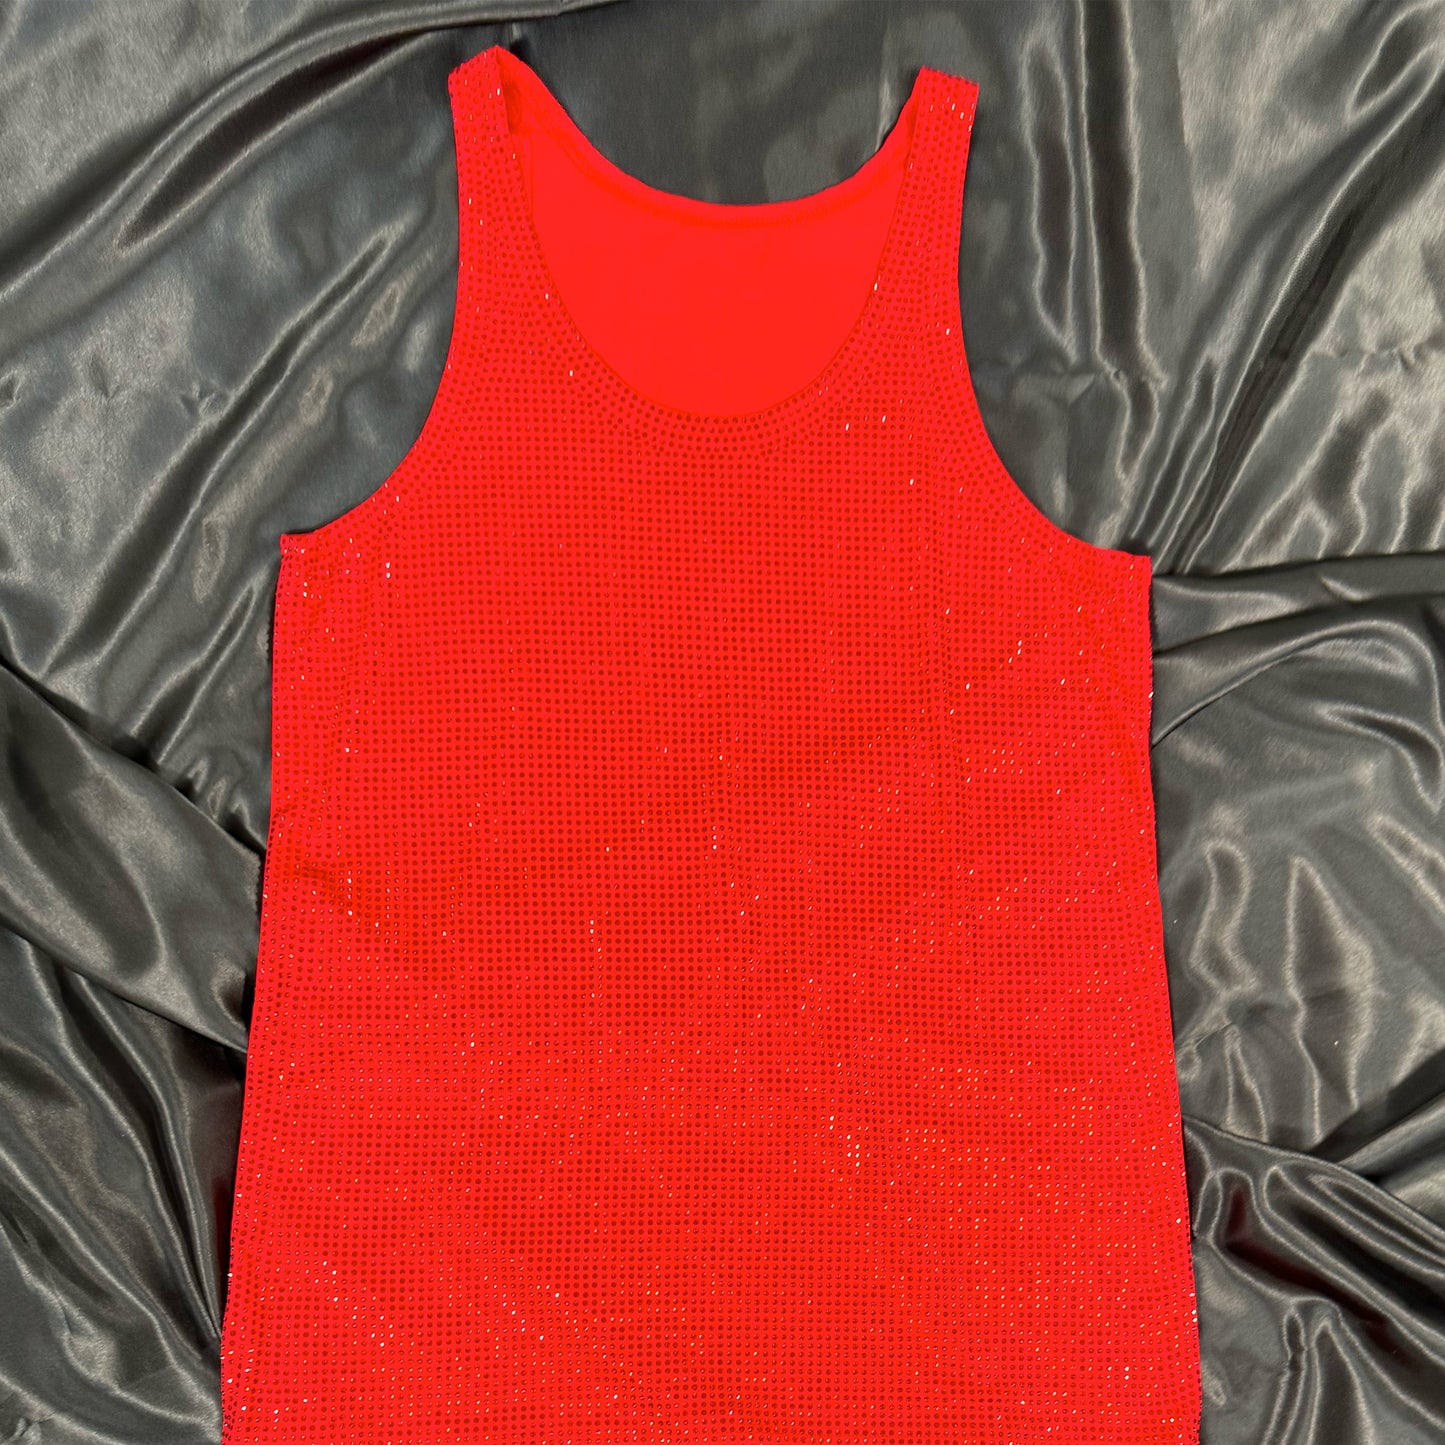 Siam Crystals on Dark Red Fabric Tank Top